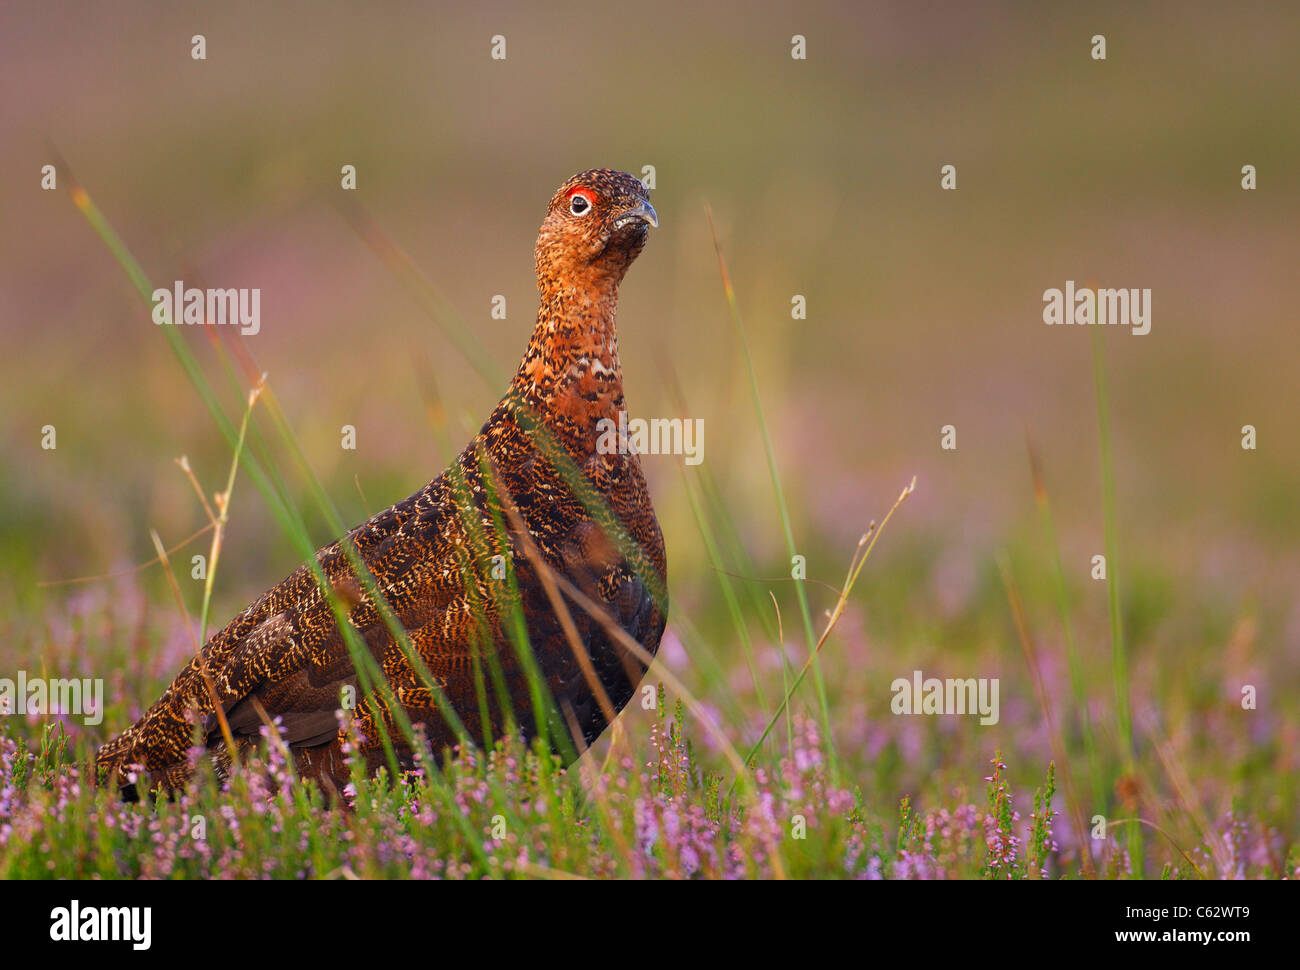 RED GROUSE Lagopus lagopus scoticus  An alert adult male among flowering heather Yorkshire Dales National Park, Yorkshire, UK Stock Photo